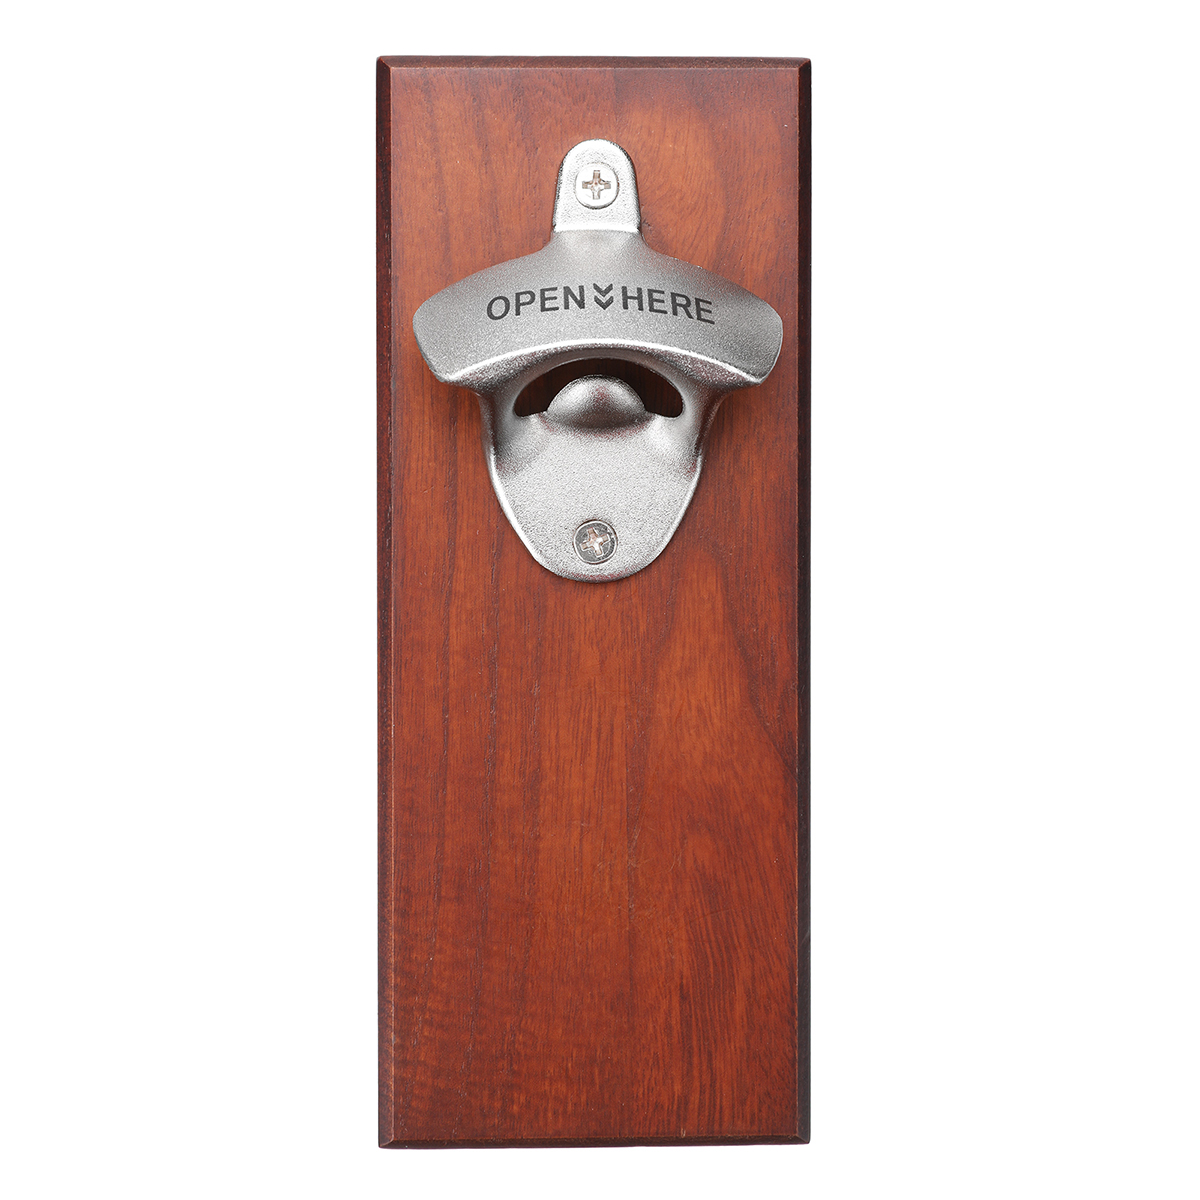 Wooden-Bottle-Opener-Wall-Mounted-Magnetic-Bottle-Openers-with-Cap-Catch-1964775-11